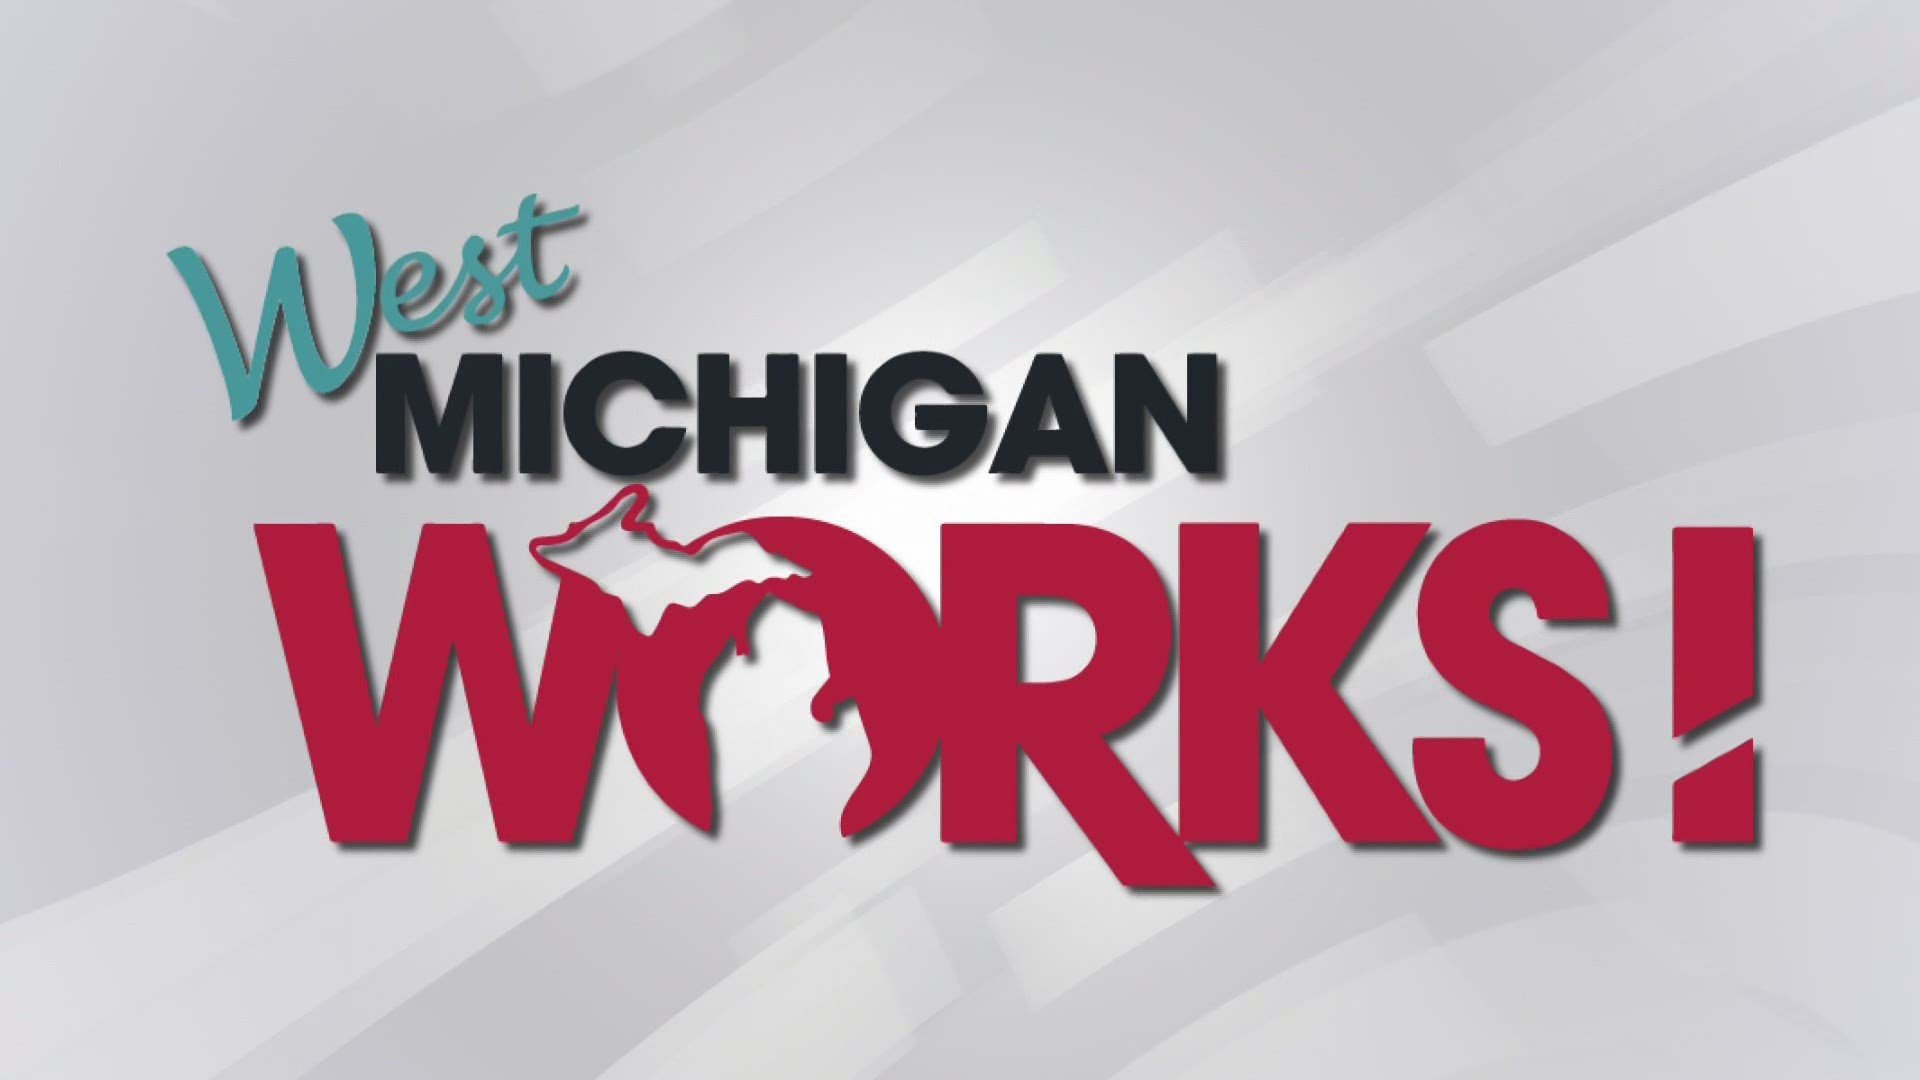 If you’re in the market for a new job or an employer looking to hire, West Michigan Works! may have the answer.